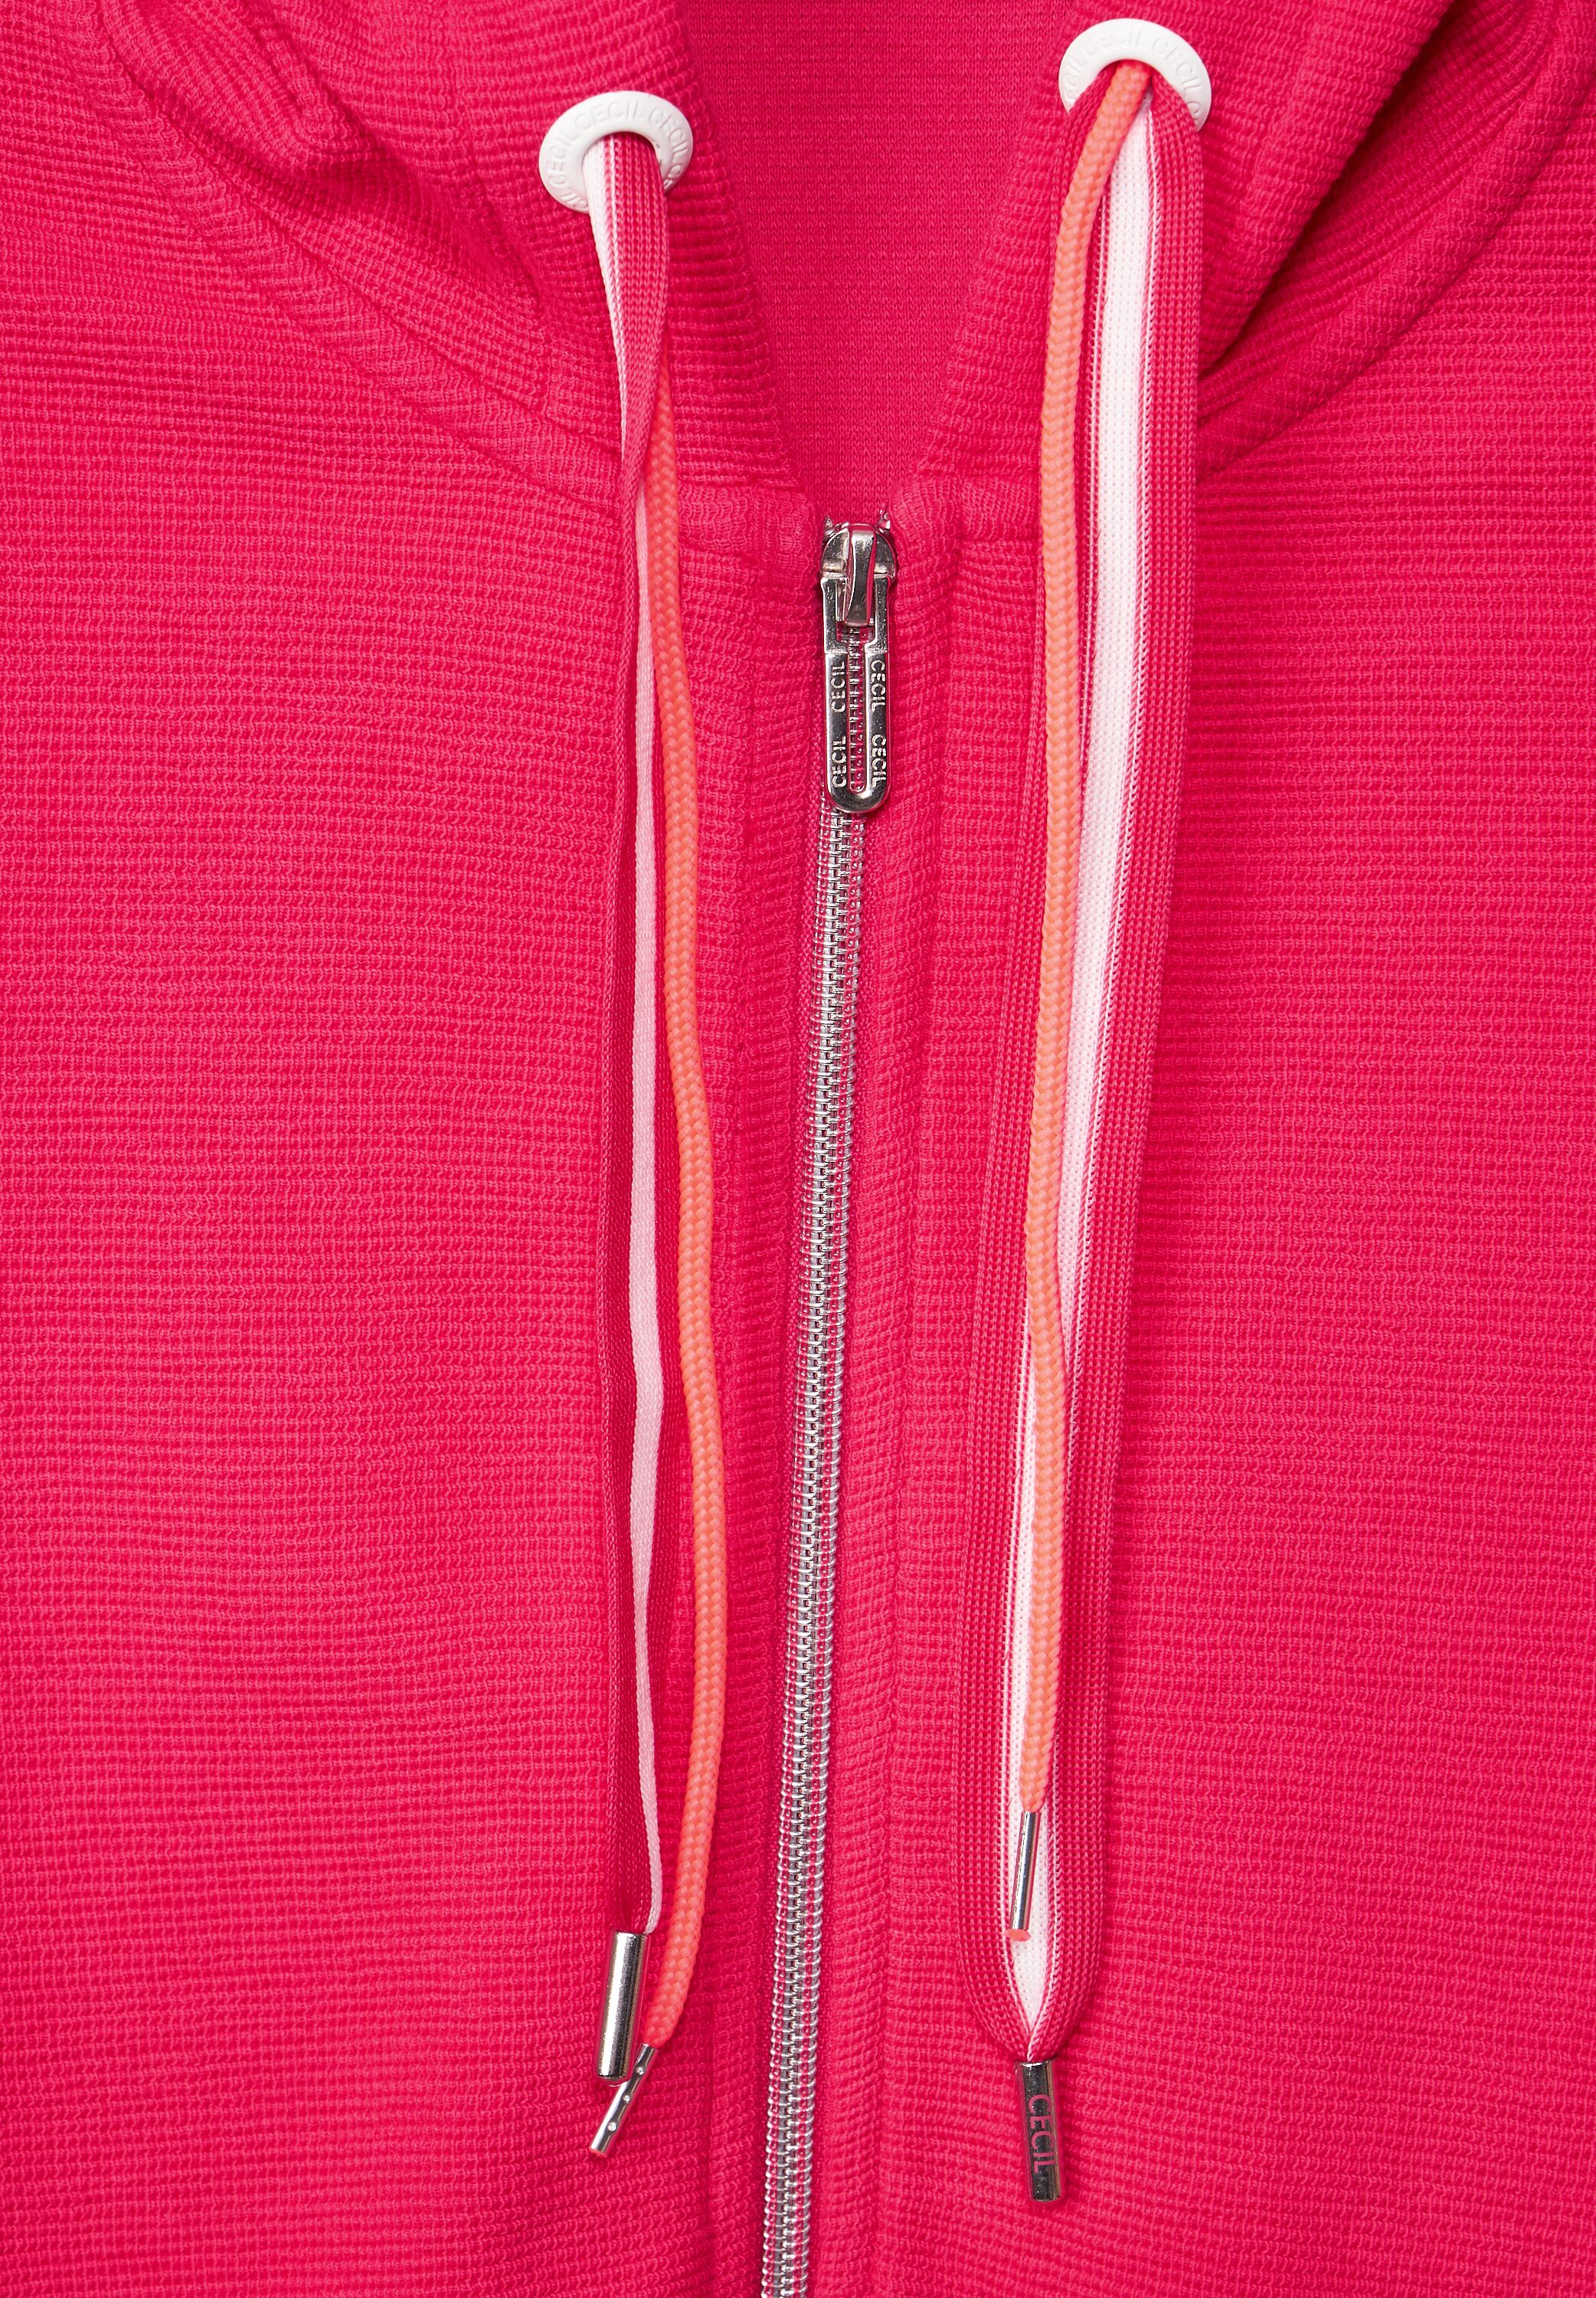 Red im Strawberry SALE B319398-14472 CECIL reduziert - Mode in CONCEPT Shirtjacke